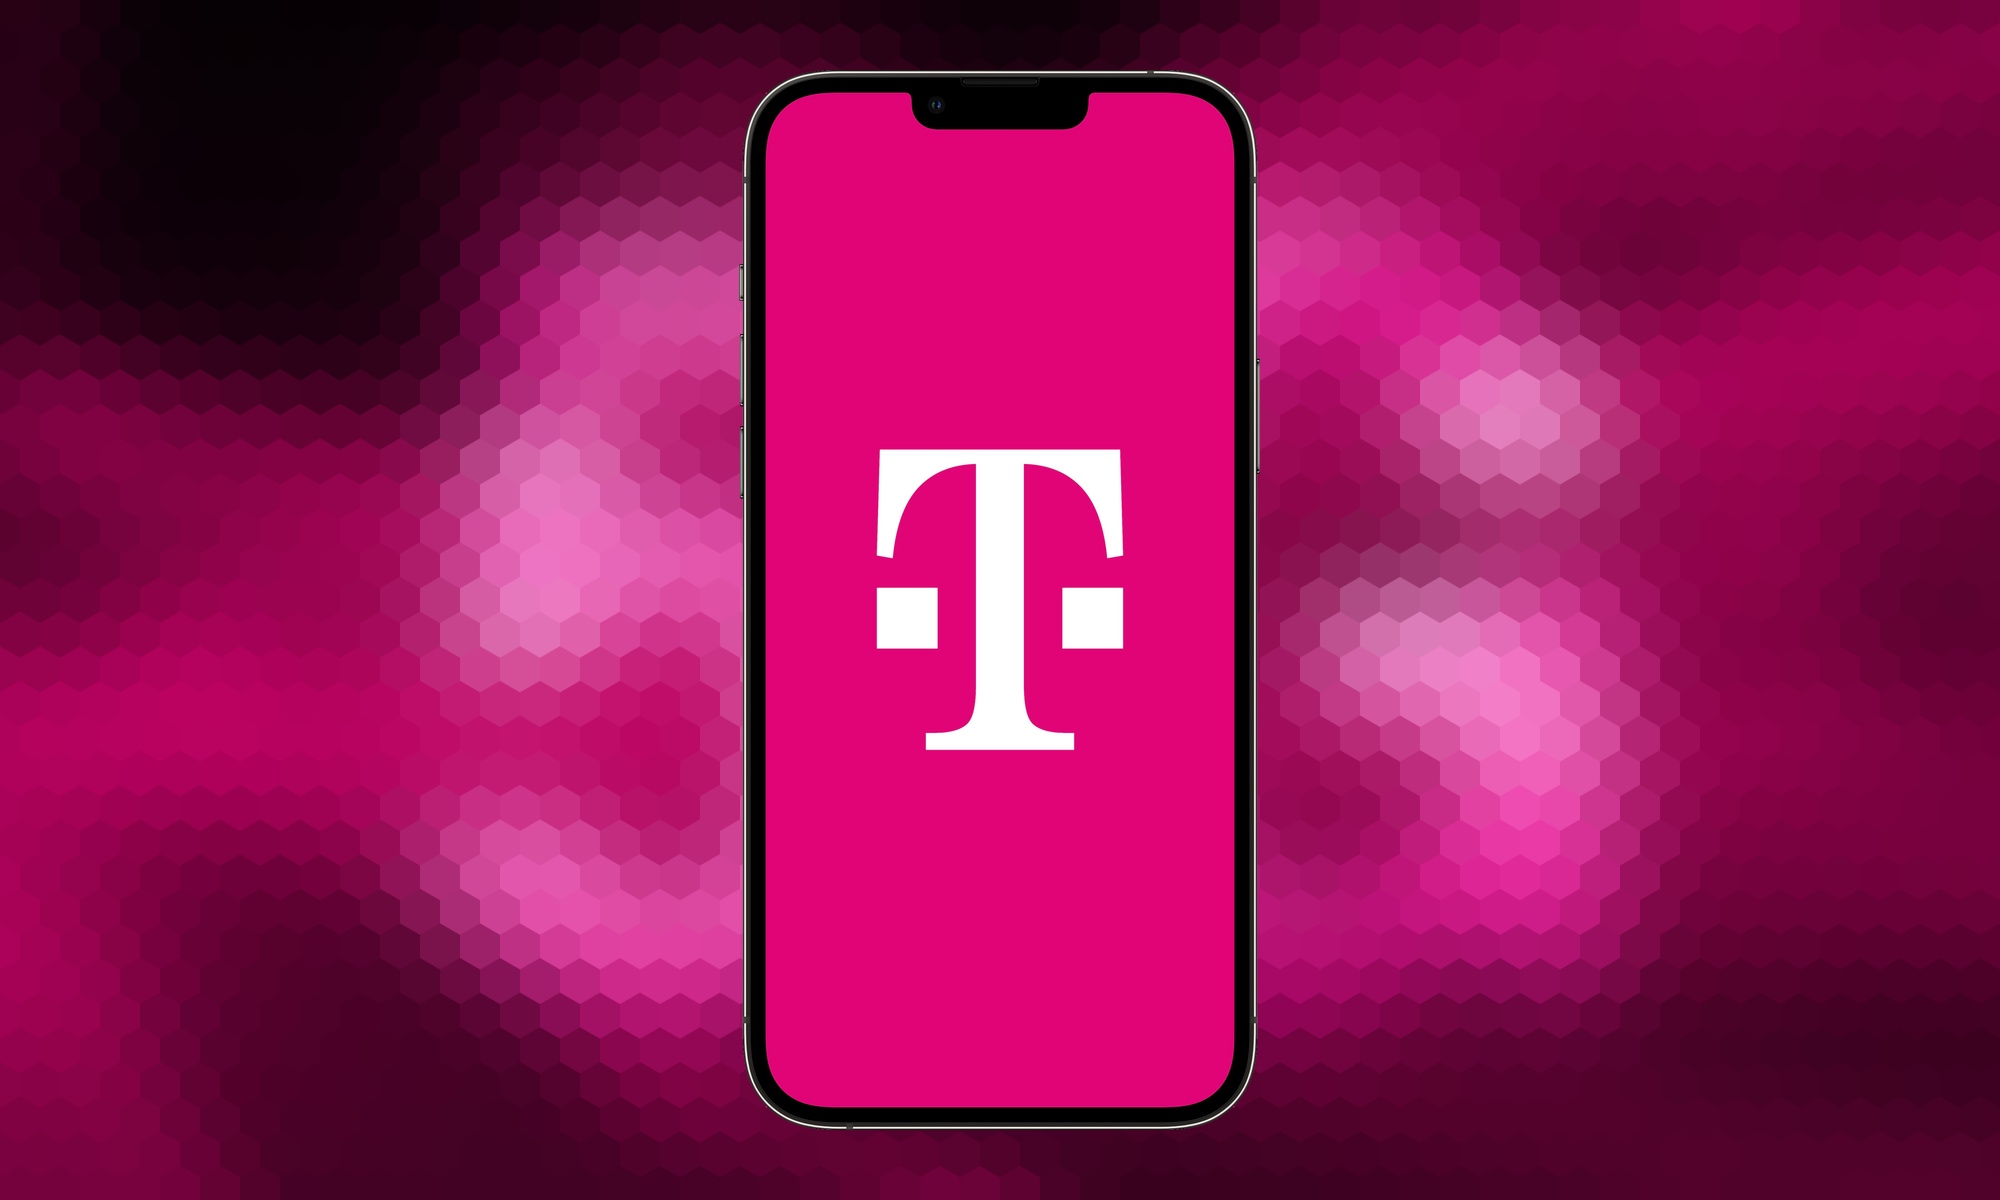 T-Mobile will soon begin forced migration of certain older cellular plans to newer ones